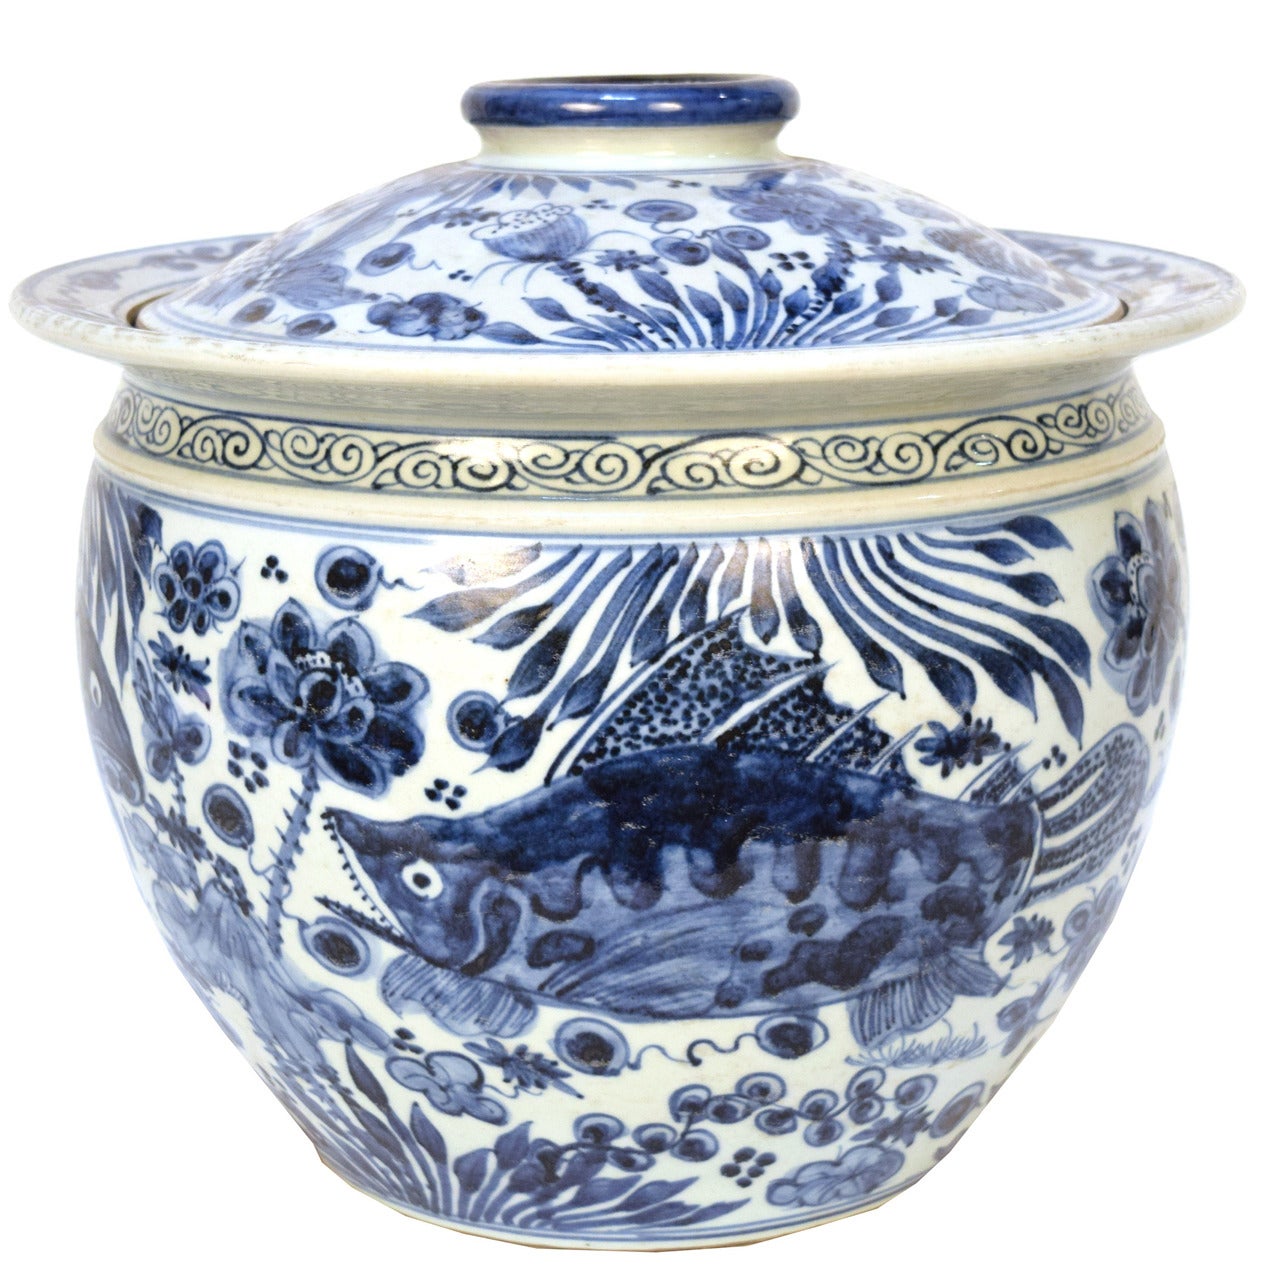 Chinese Blue and White Covered Jar with Fish